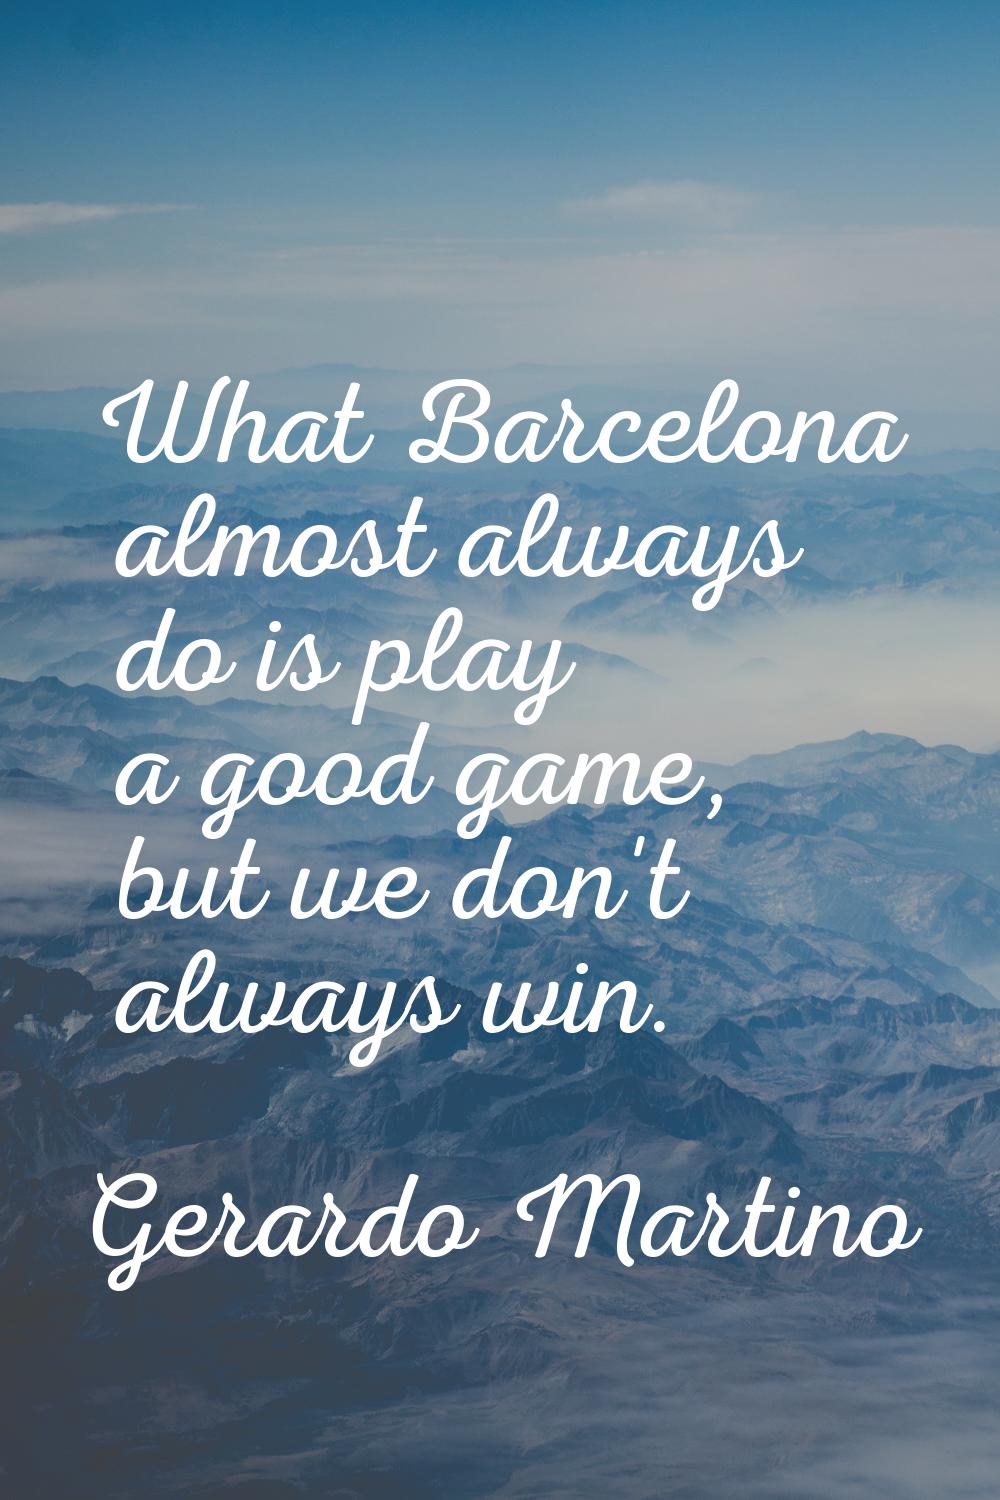 What Barcelona almost always do is play a good game, but we don't always win.